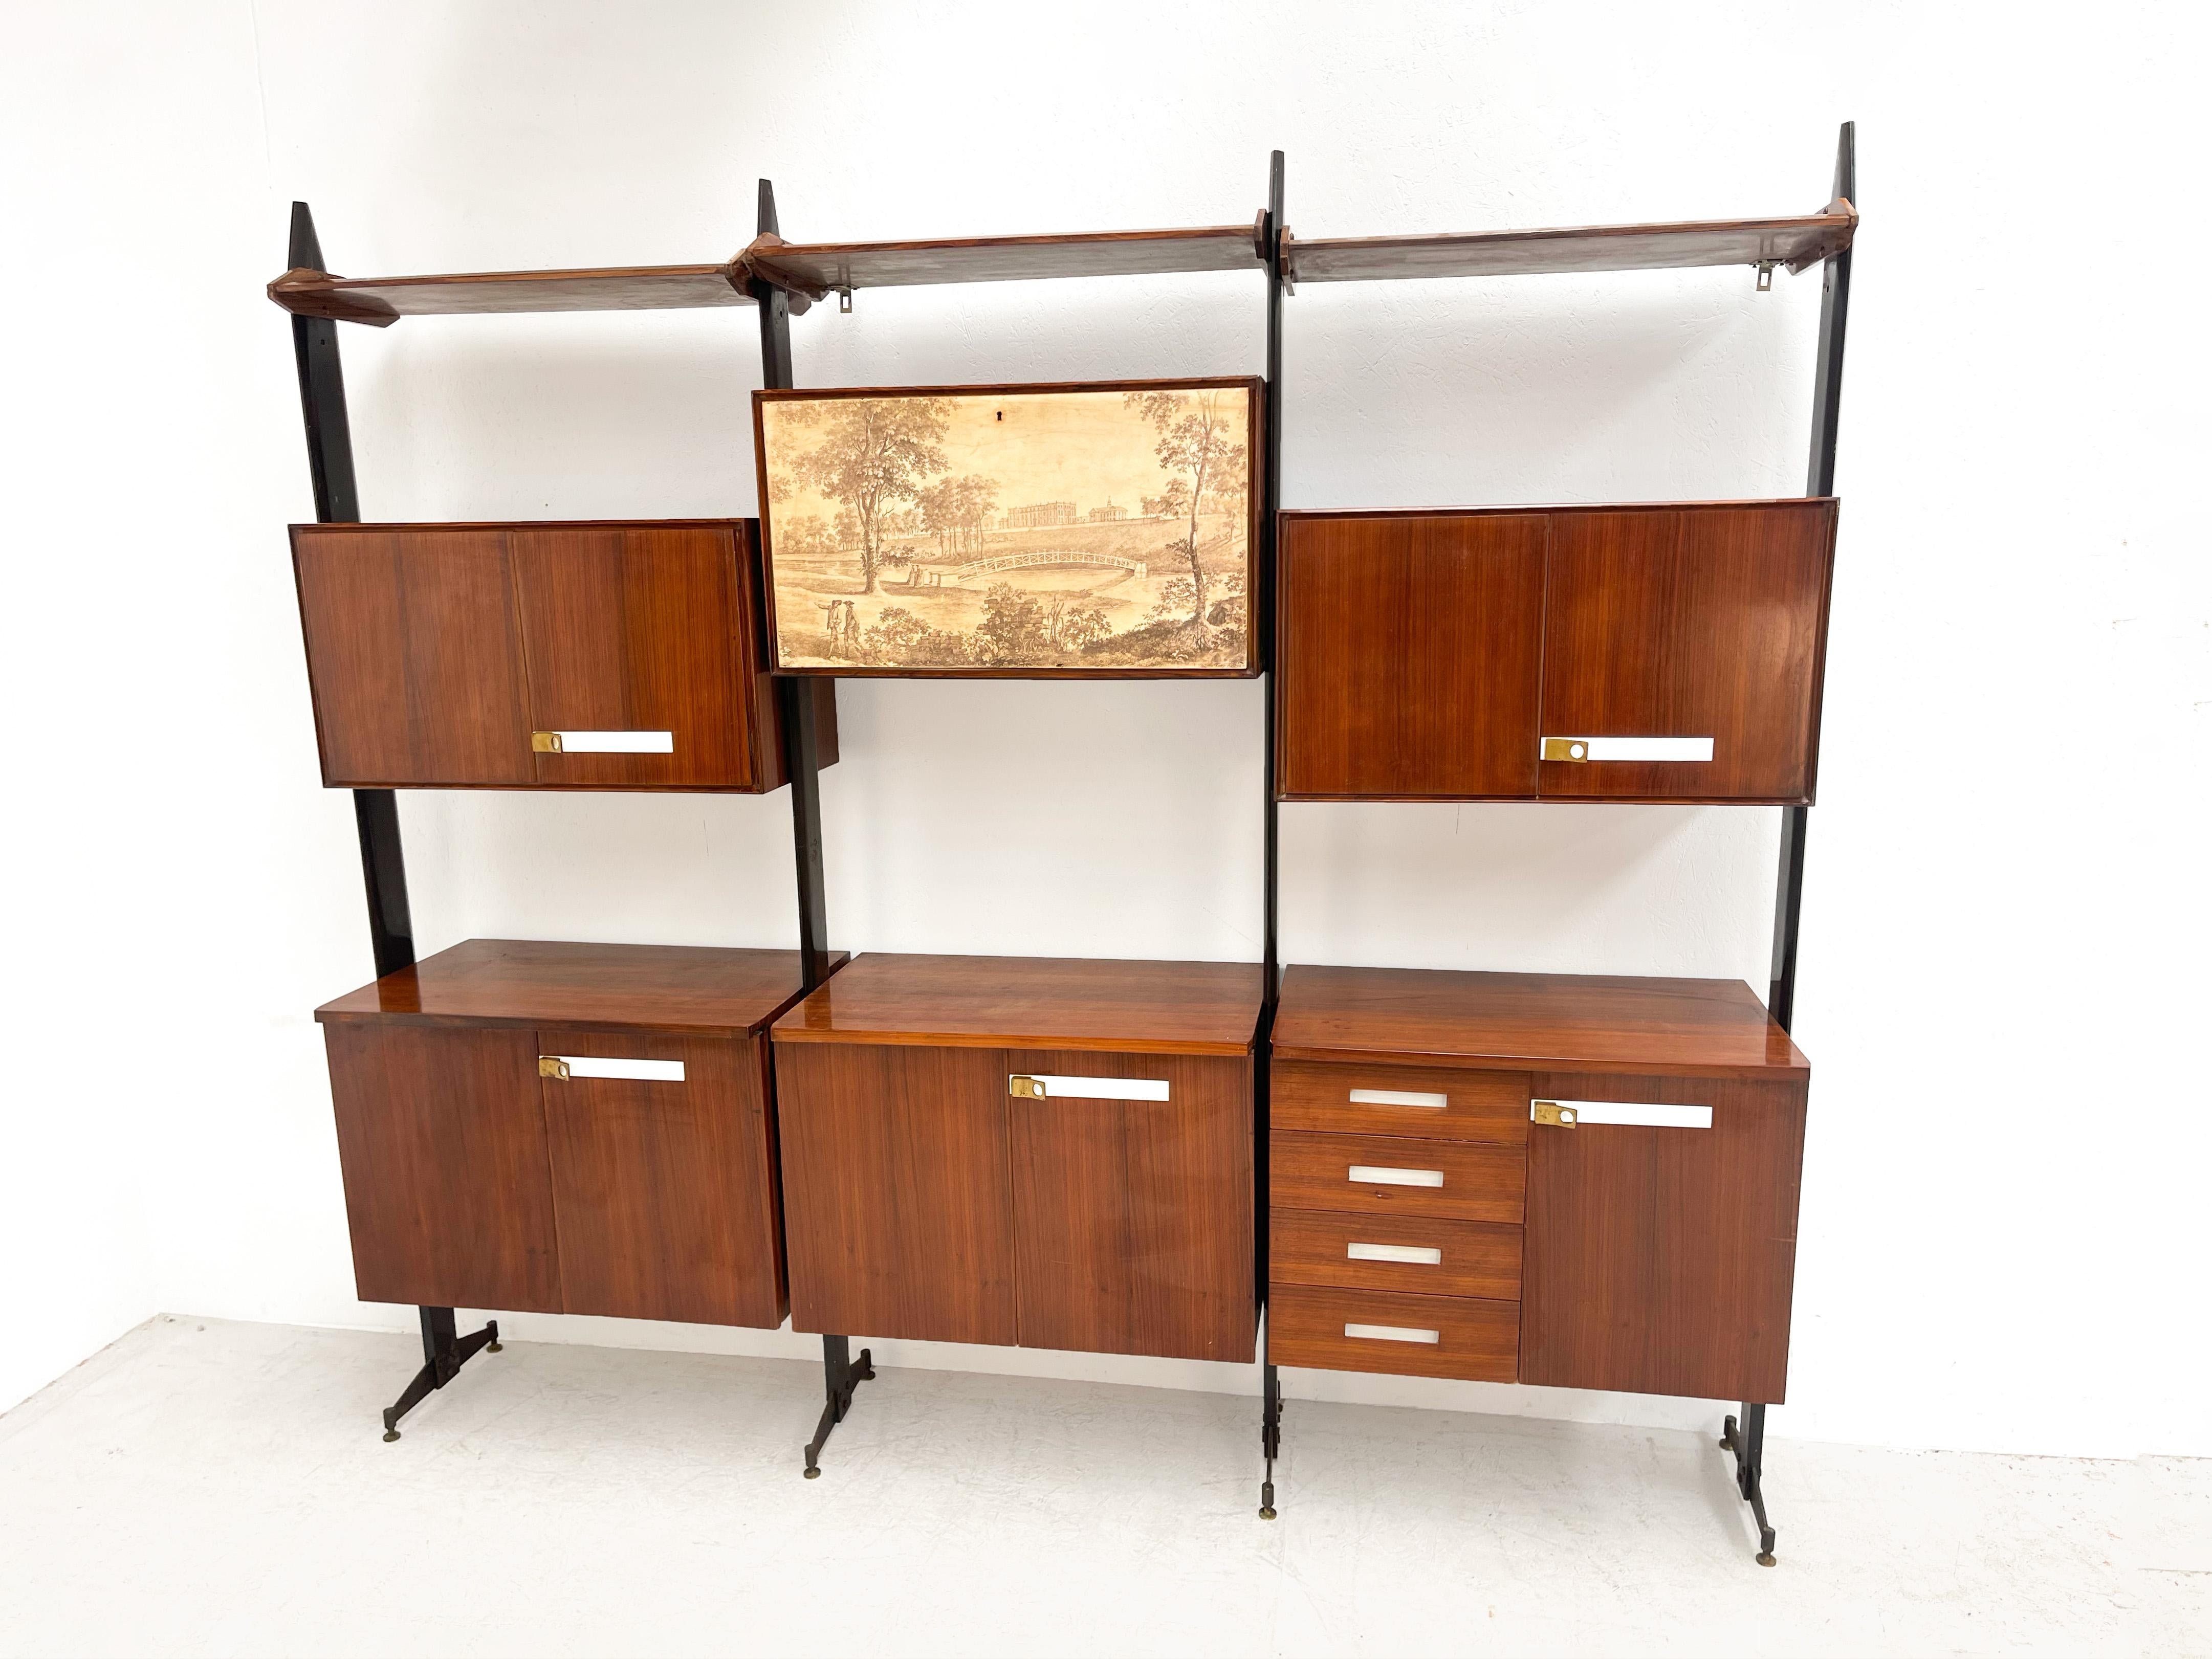 High quality italian design wall unit.

This free standing and fully modular wall unit consists of plenty of storage space and has beautiful italian design elements.

Great decorative and practical piece.

1960s - Italy.

One door has a